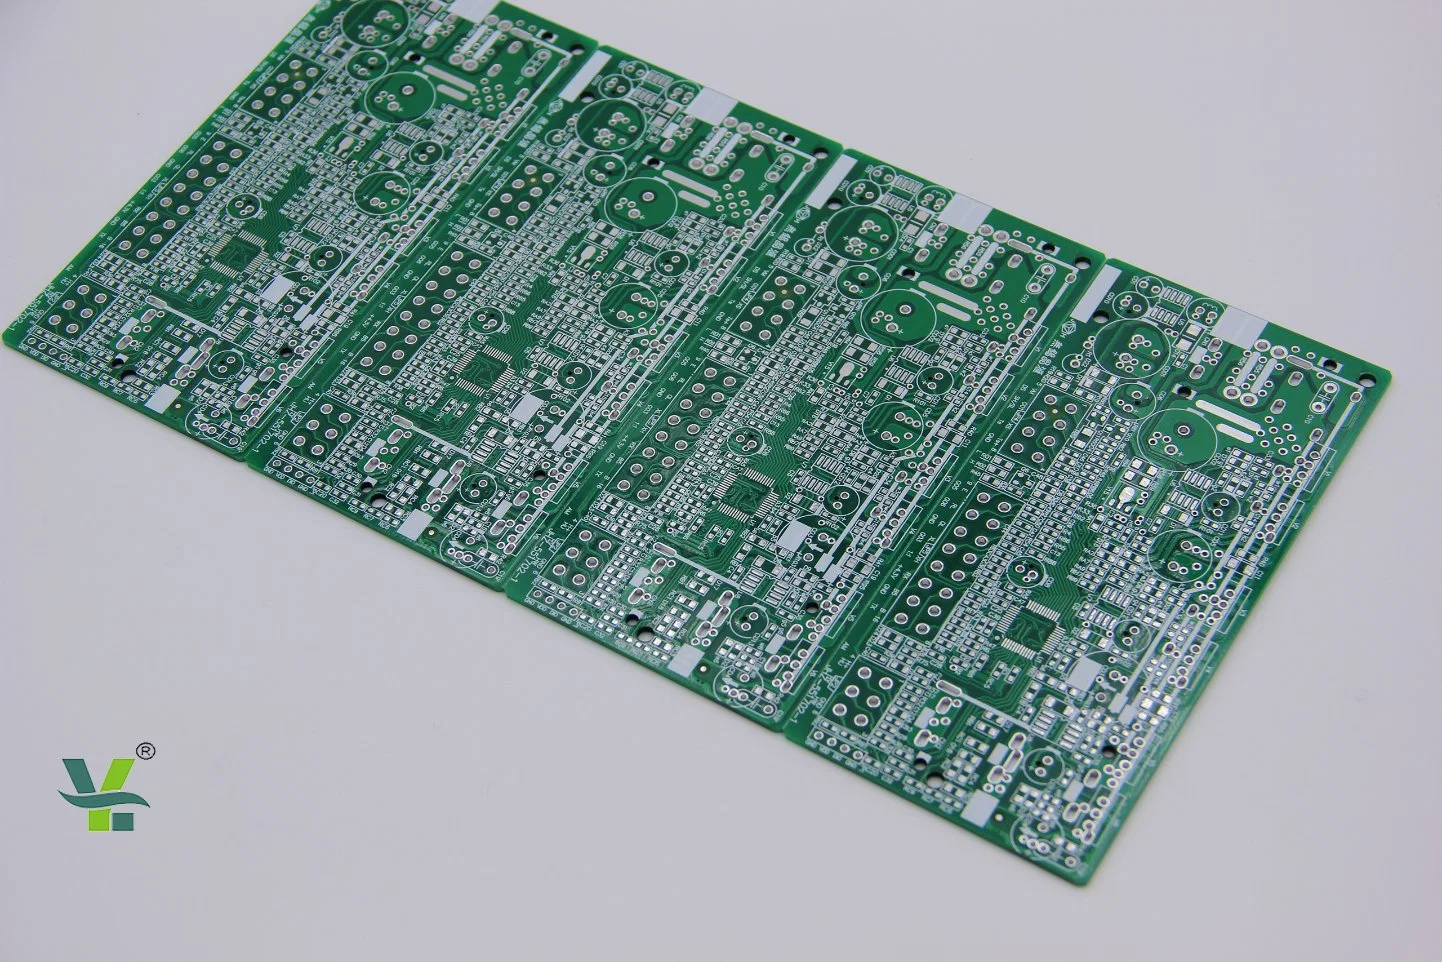 The PCB of Electric Bicycle Power Control Printed Circuit Board Electric Bike